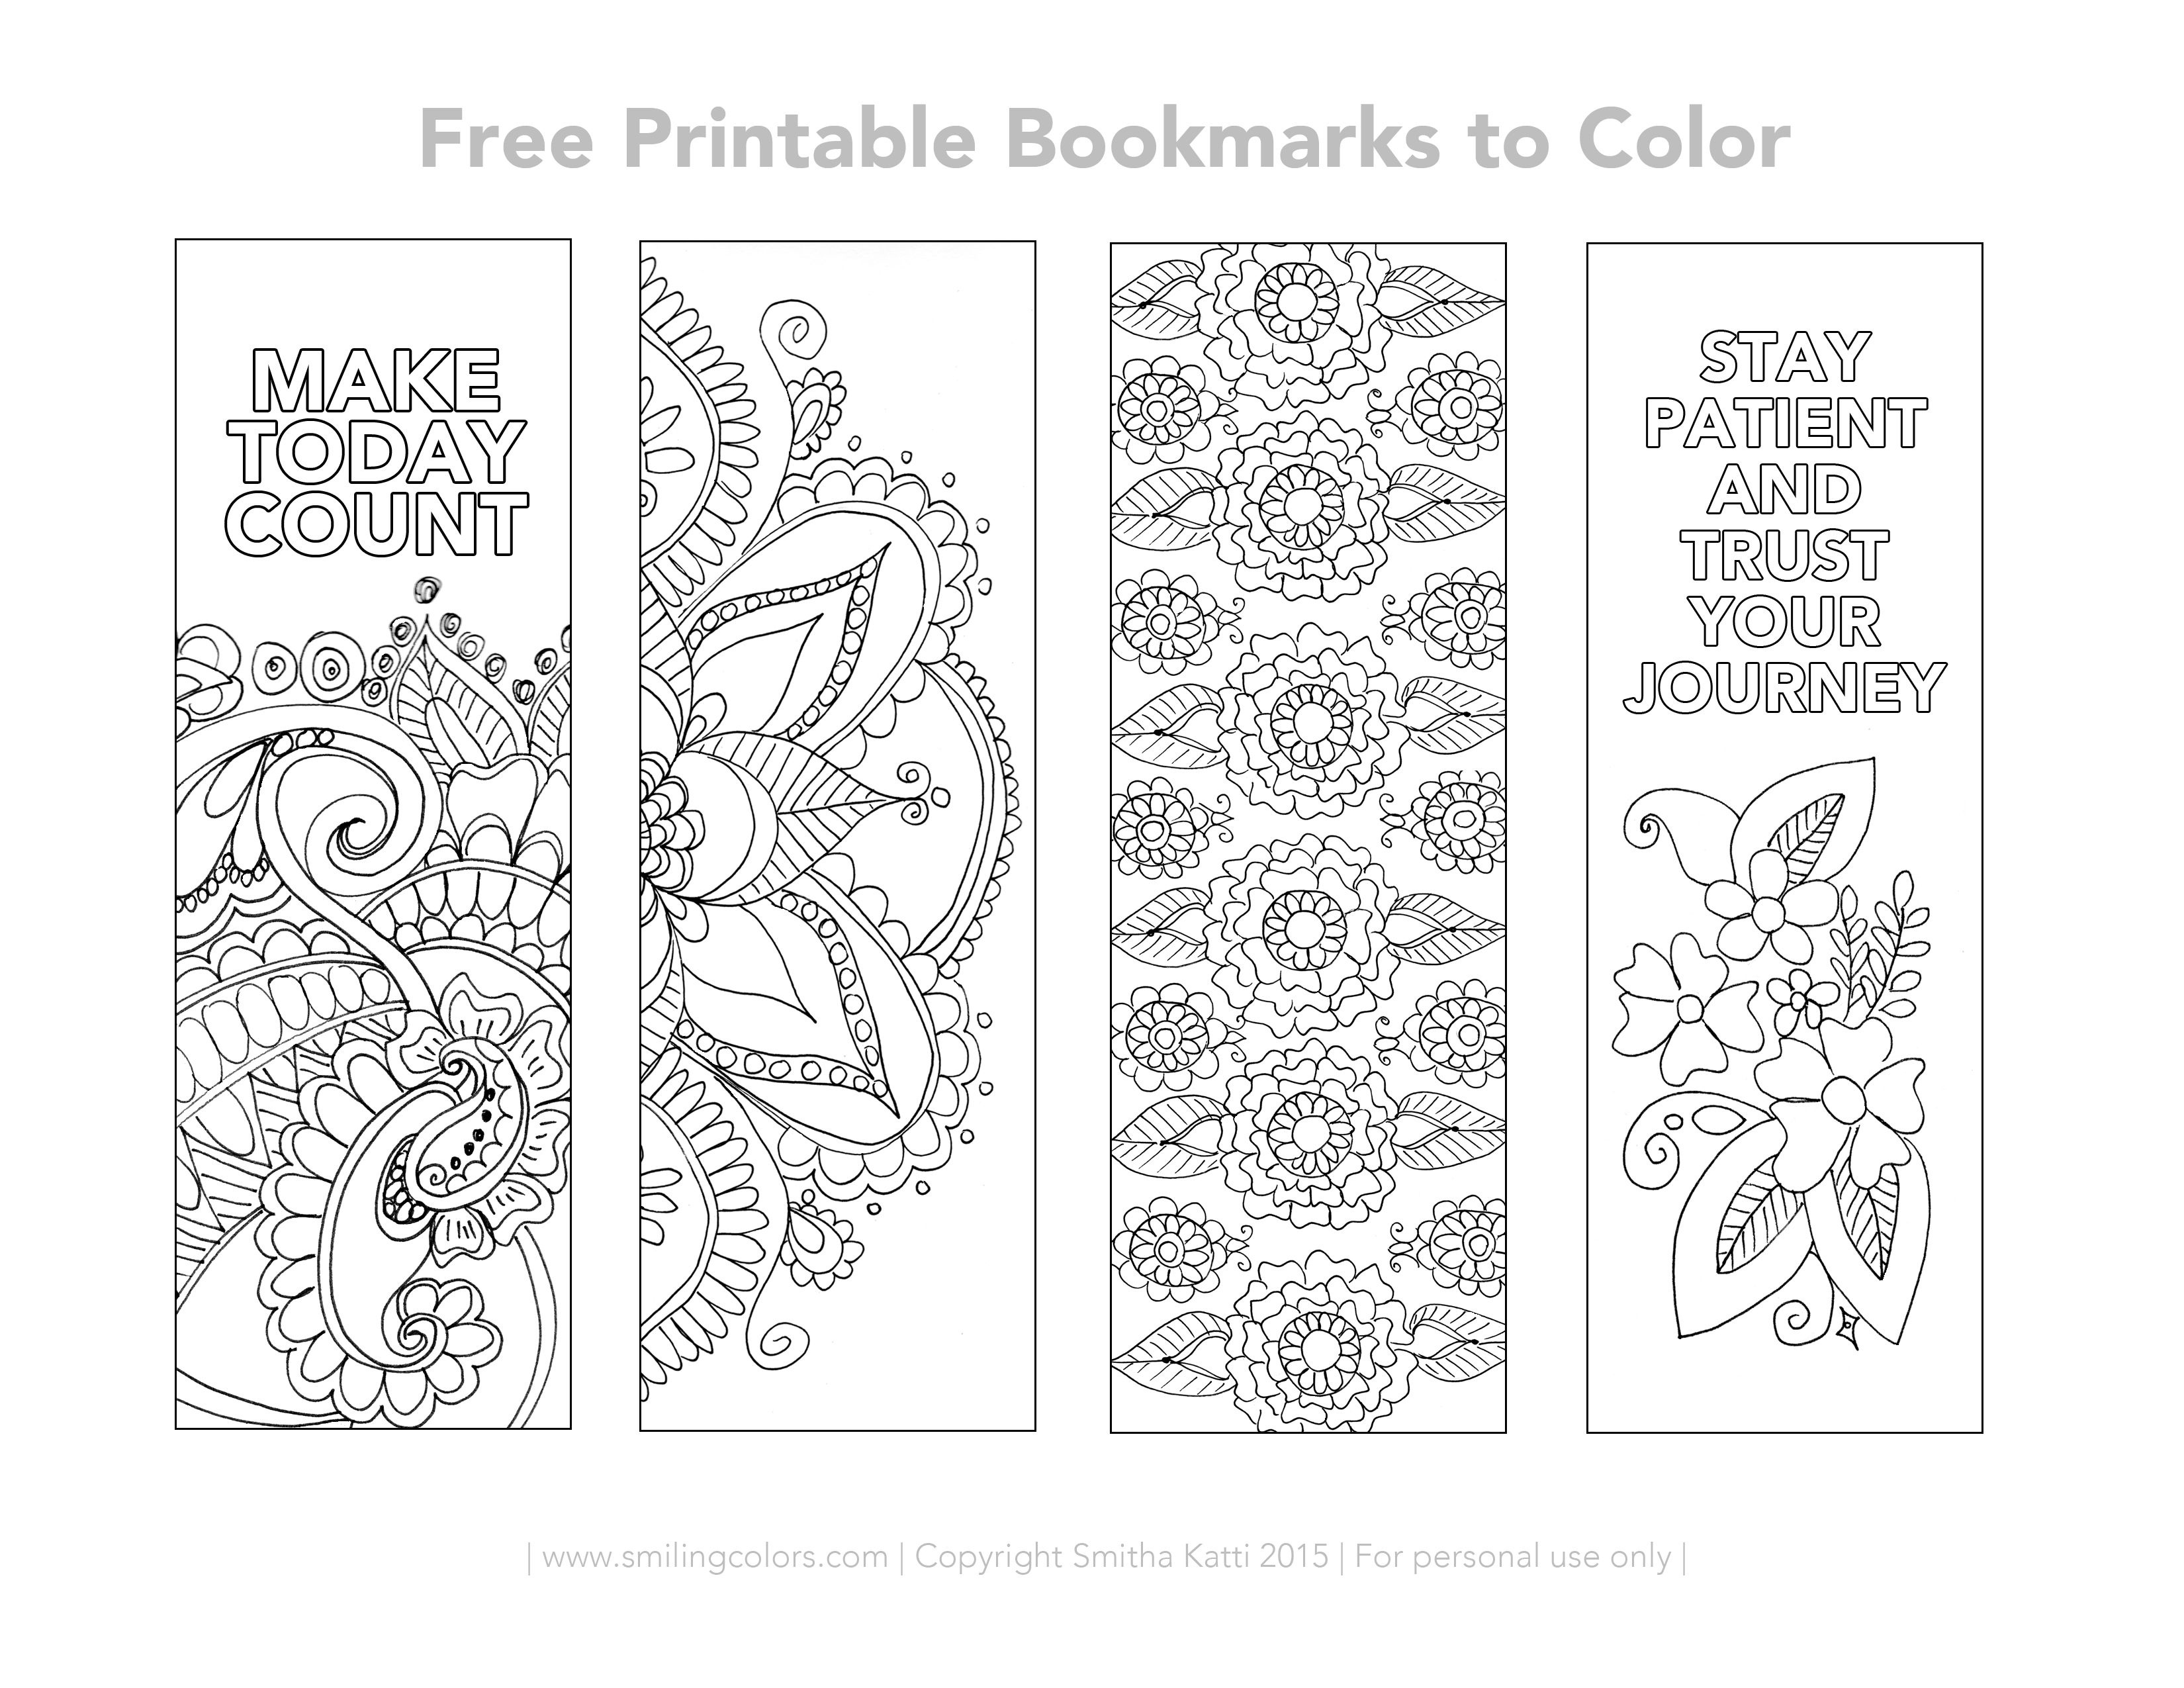 Free Printable Bookmarks To Color | Inspirational | Free Printable - Free Printable Christmas Bookmarks To Color